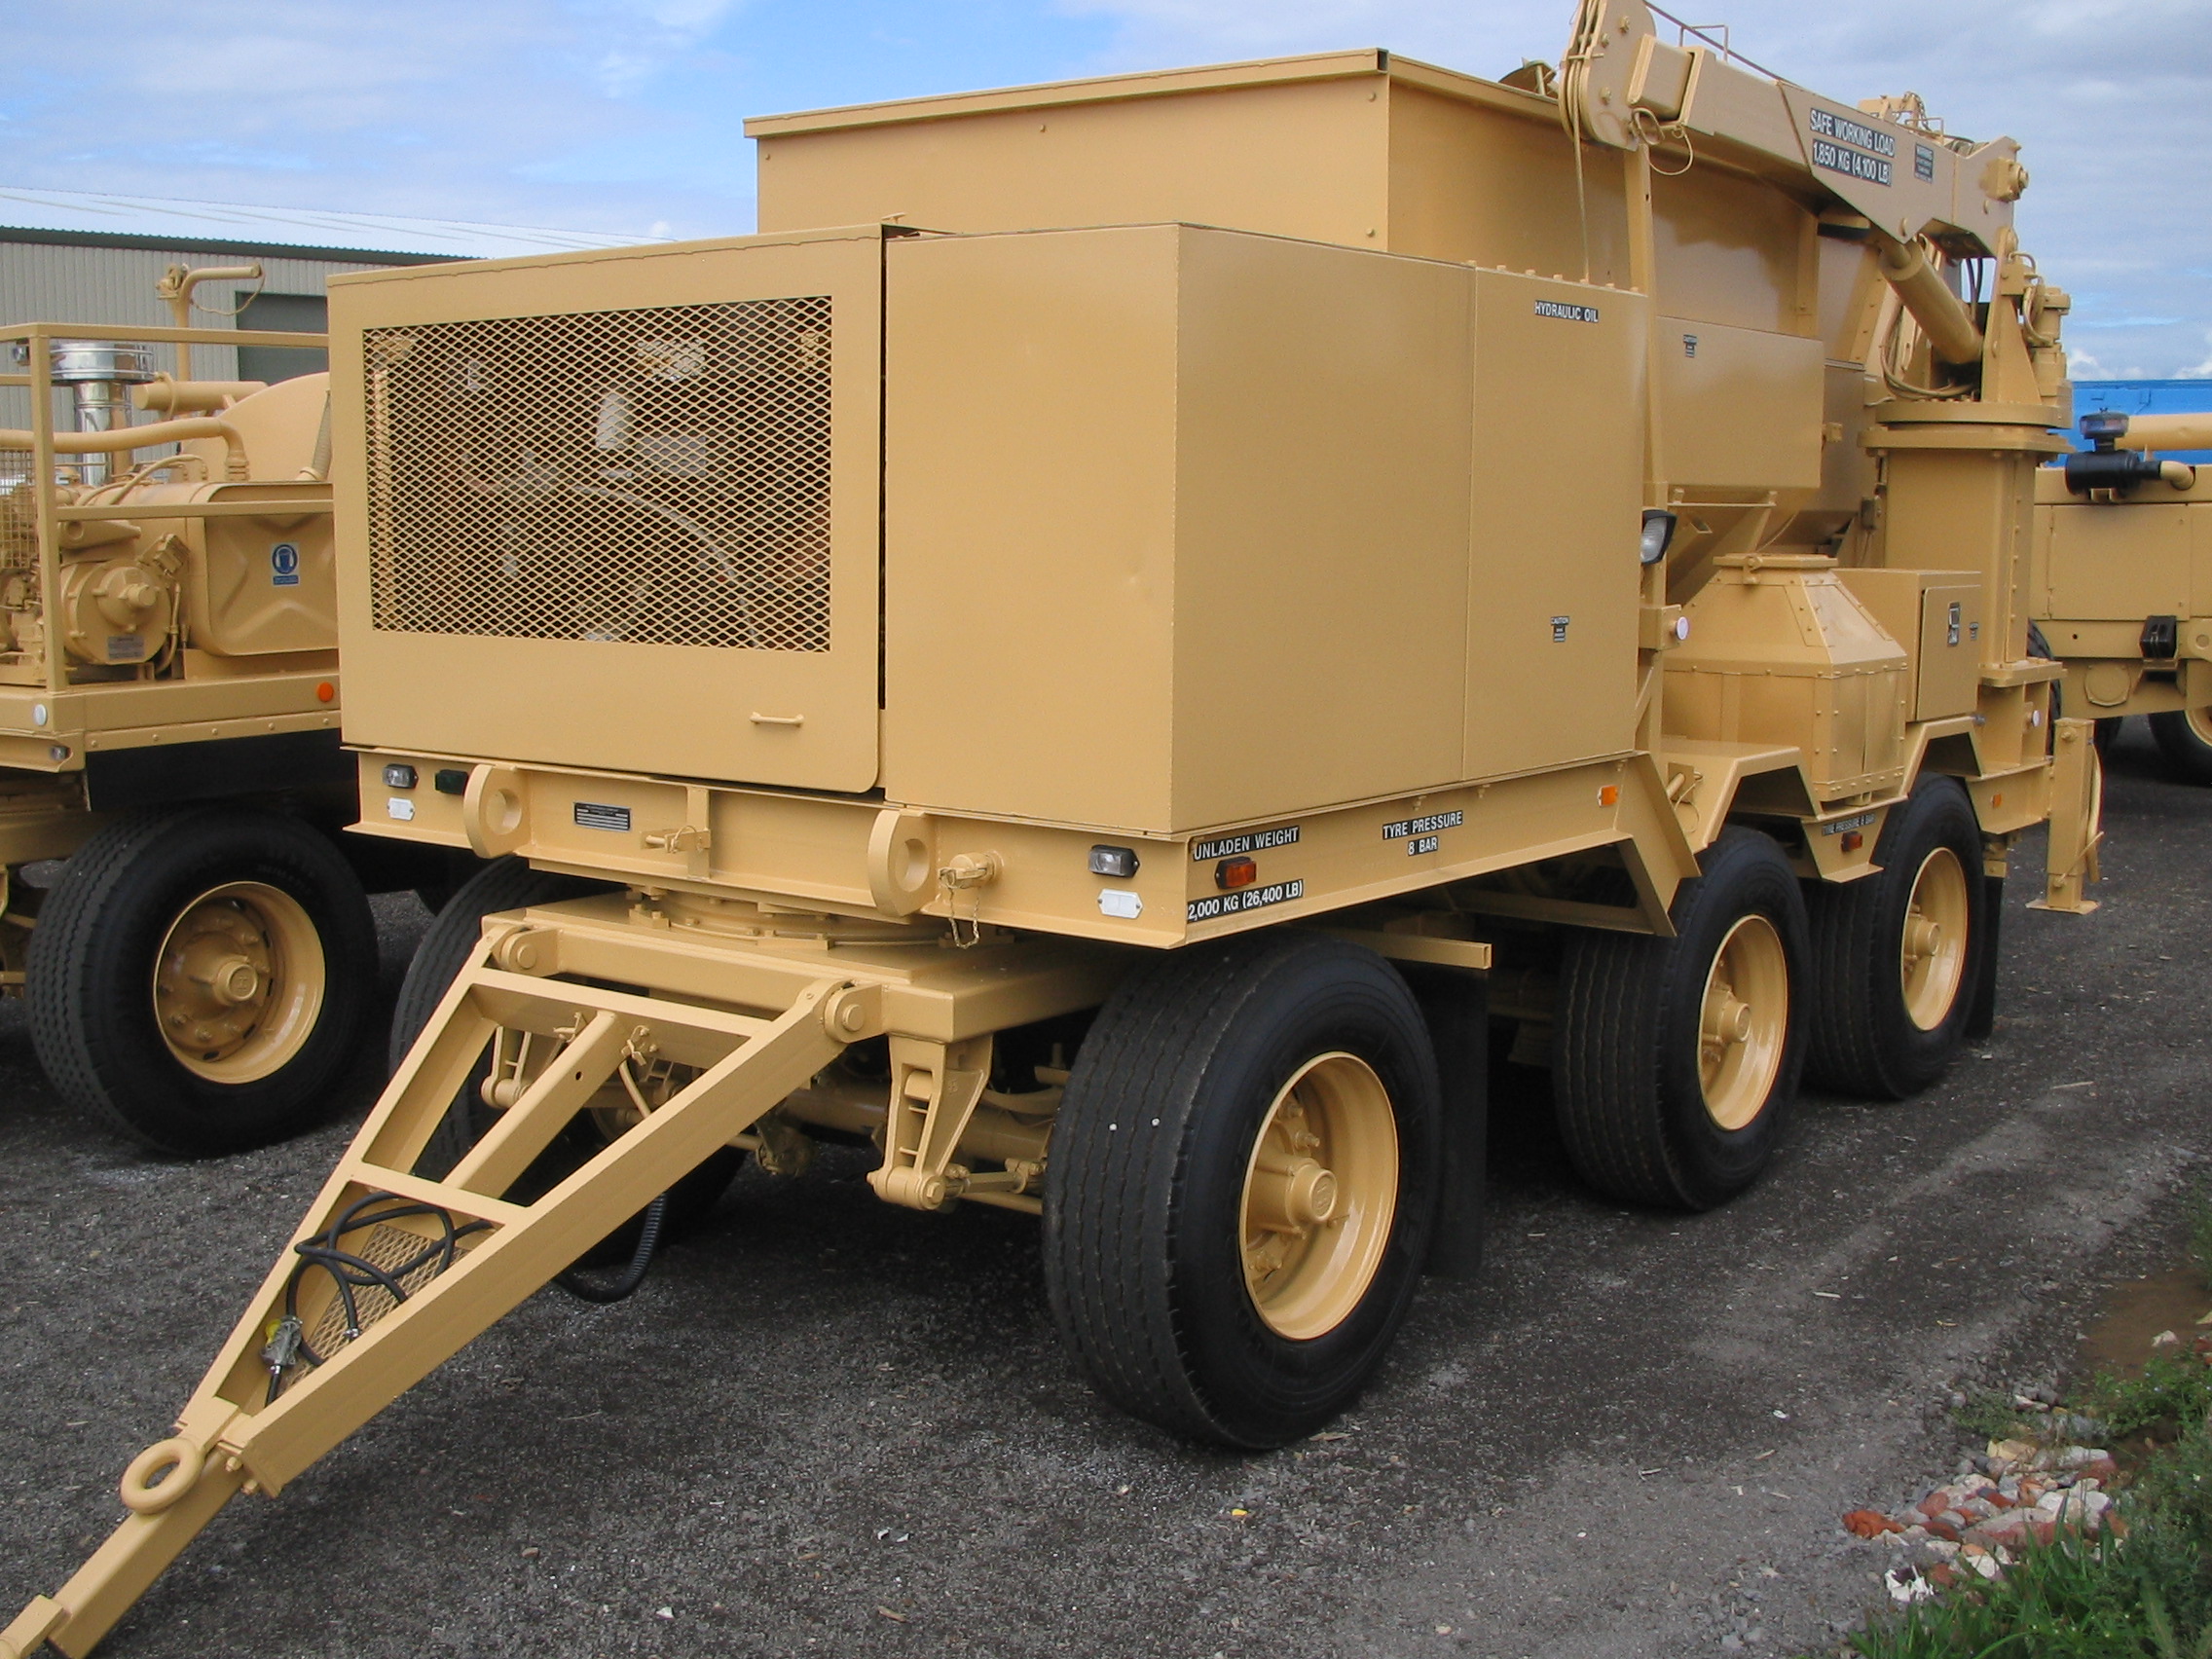 Volumetric concrete mixer - Govsales of mod surplus ex army trucks, ex army land rovers and other military vehicles for sale